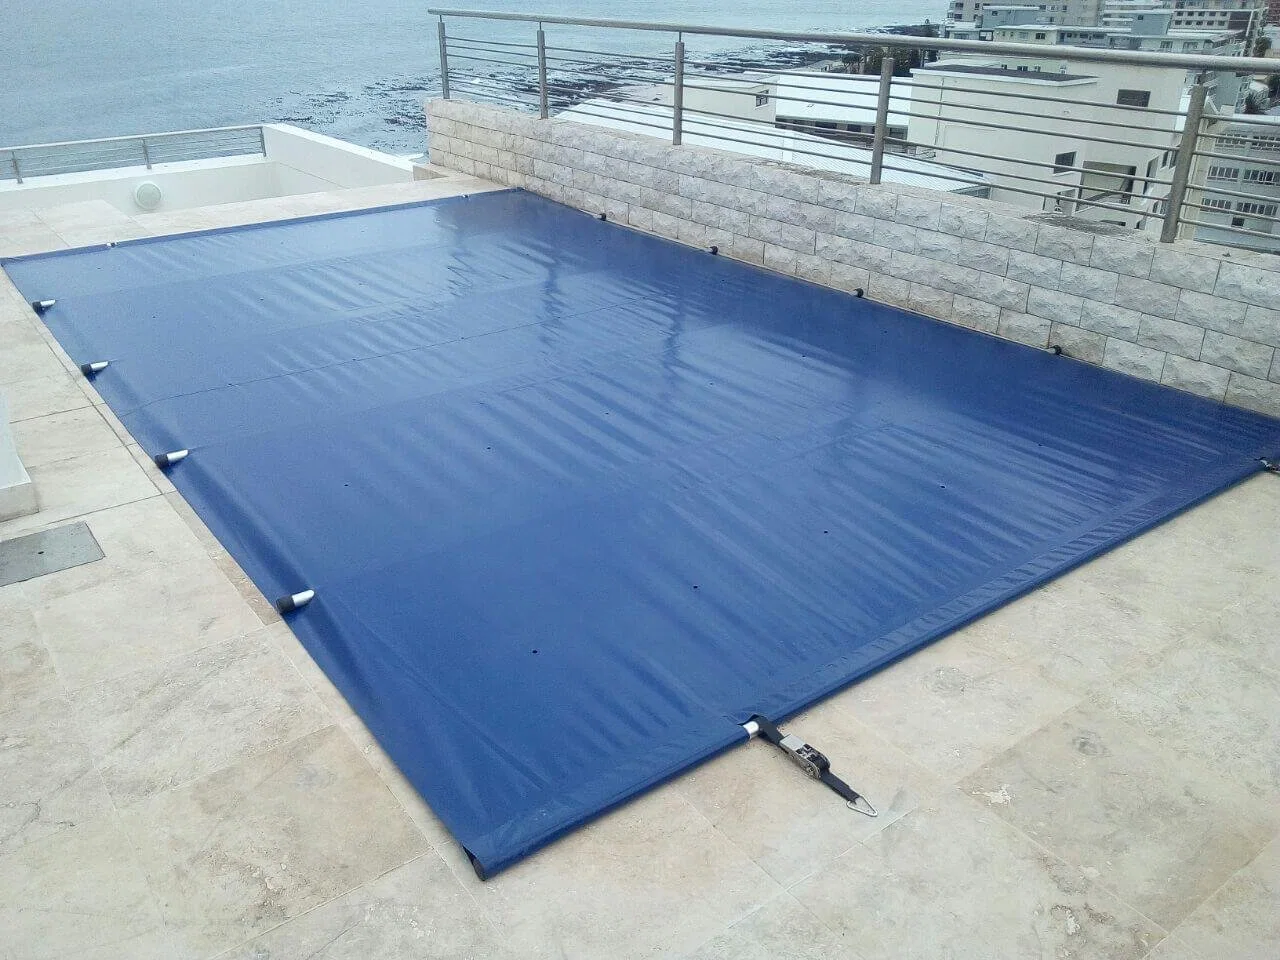 Insulation Swimming Pool Cover Fabric